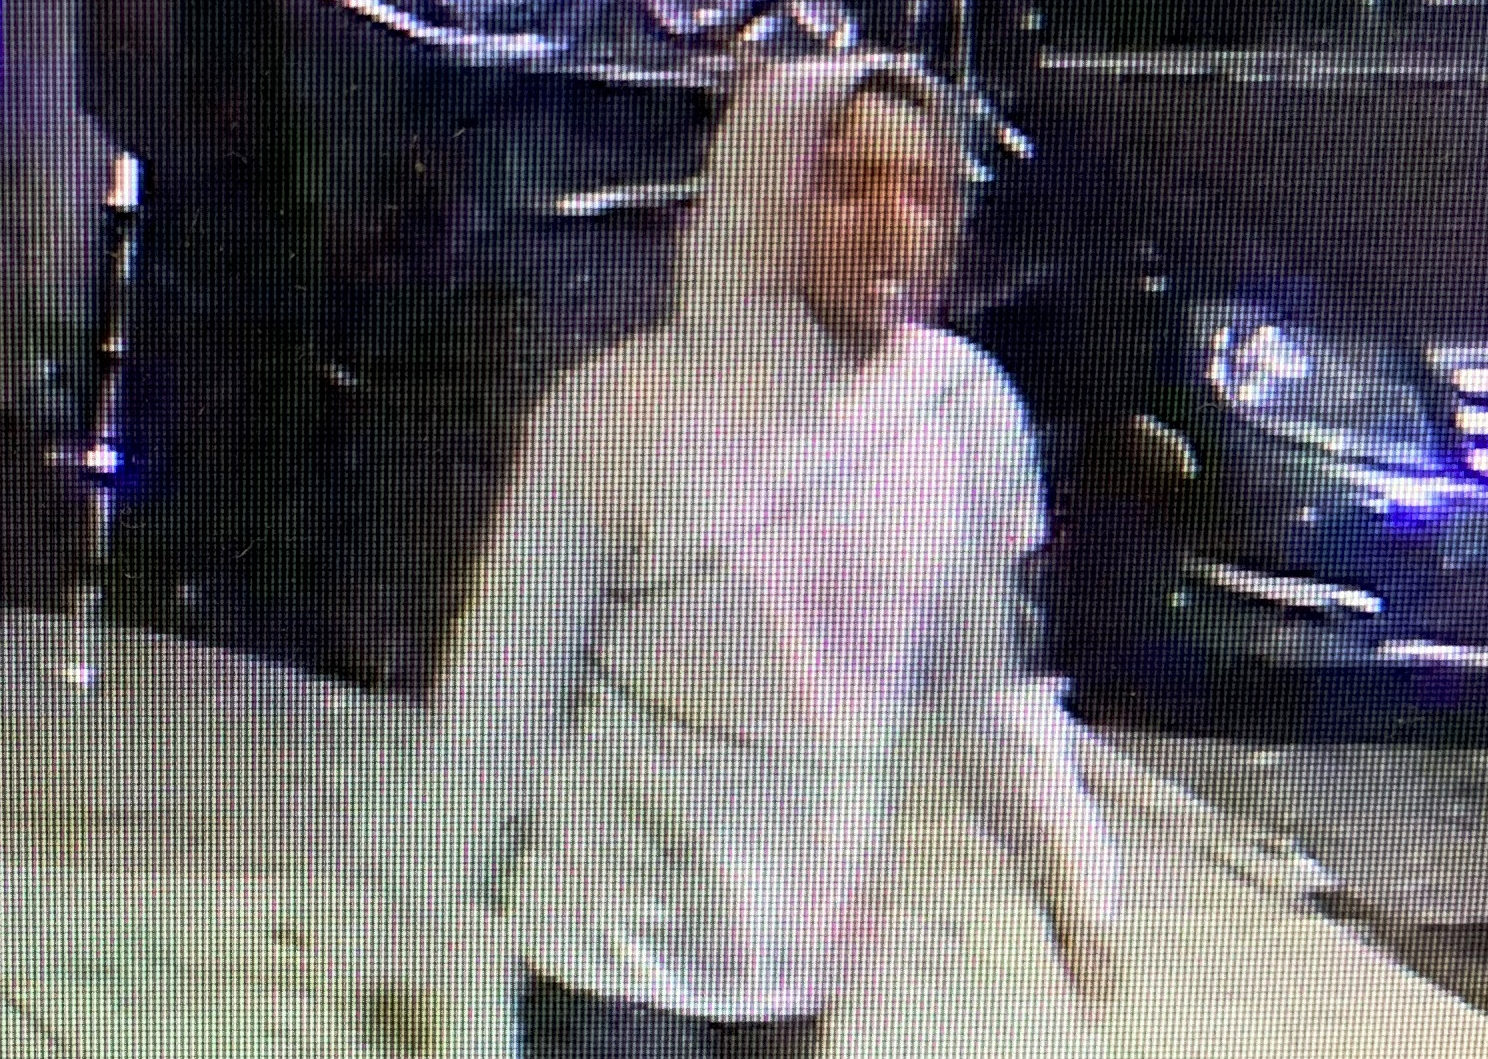 Still image of the suspect accused of hitting a 9-year-old believed to be a Hasidic Jewish boy on Nov. 25 in Williamsburg. Photo courtesy of the NYPD